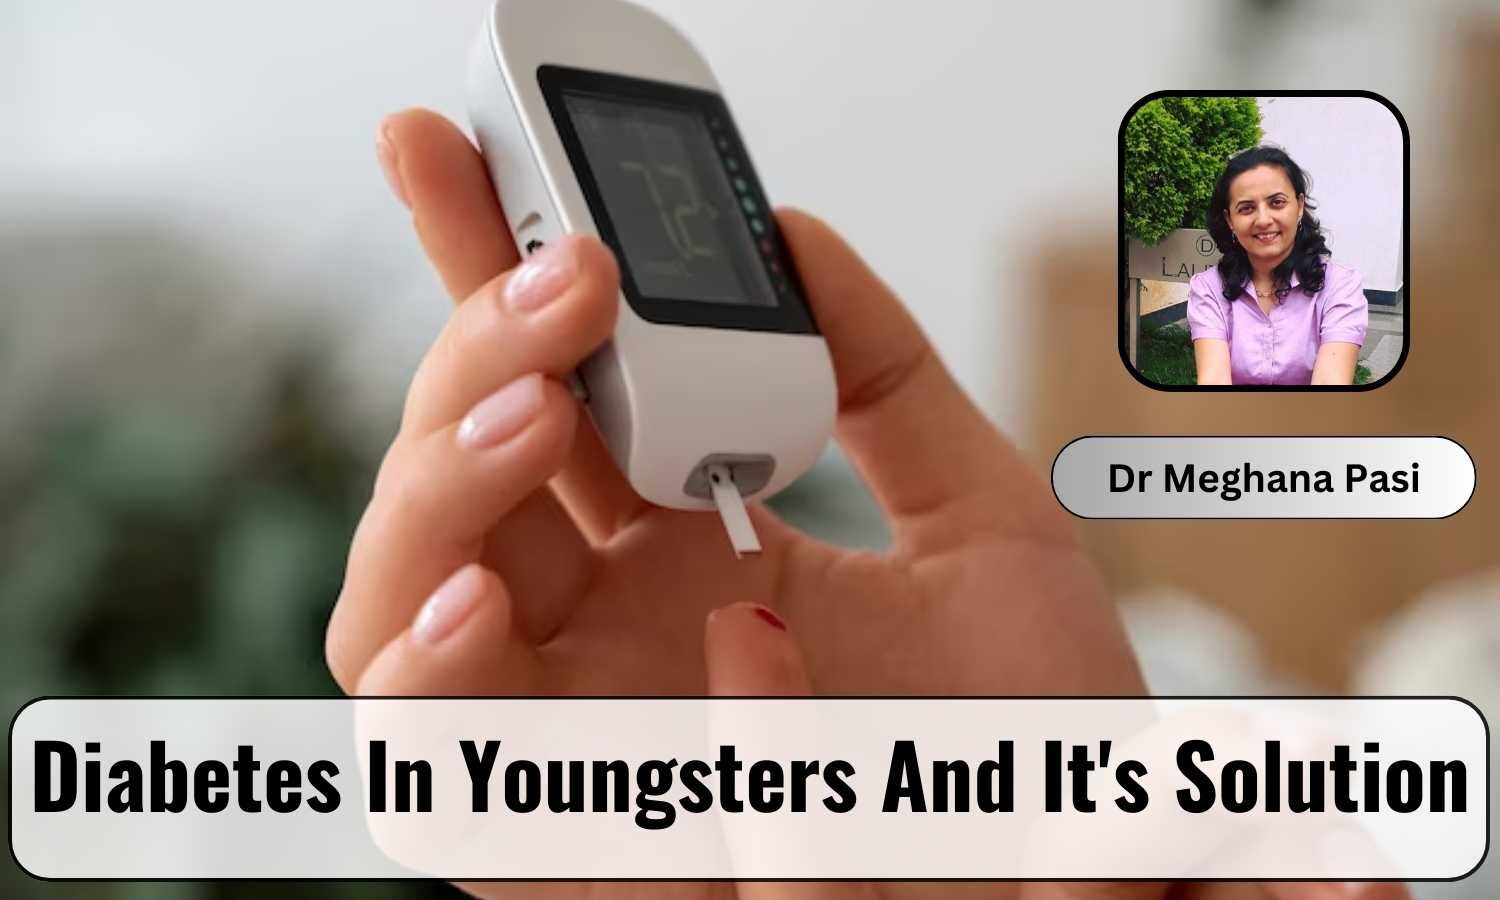 Rise Of Diabetes In Youngsters: How To Counter The Problem?